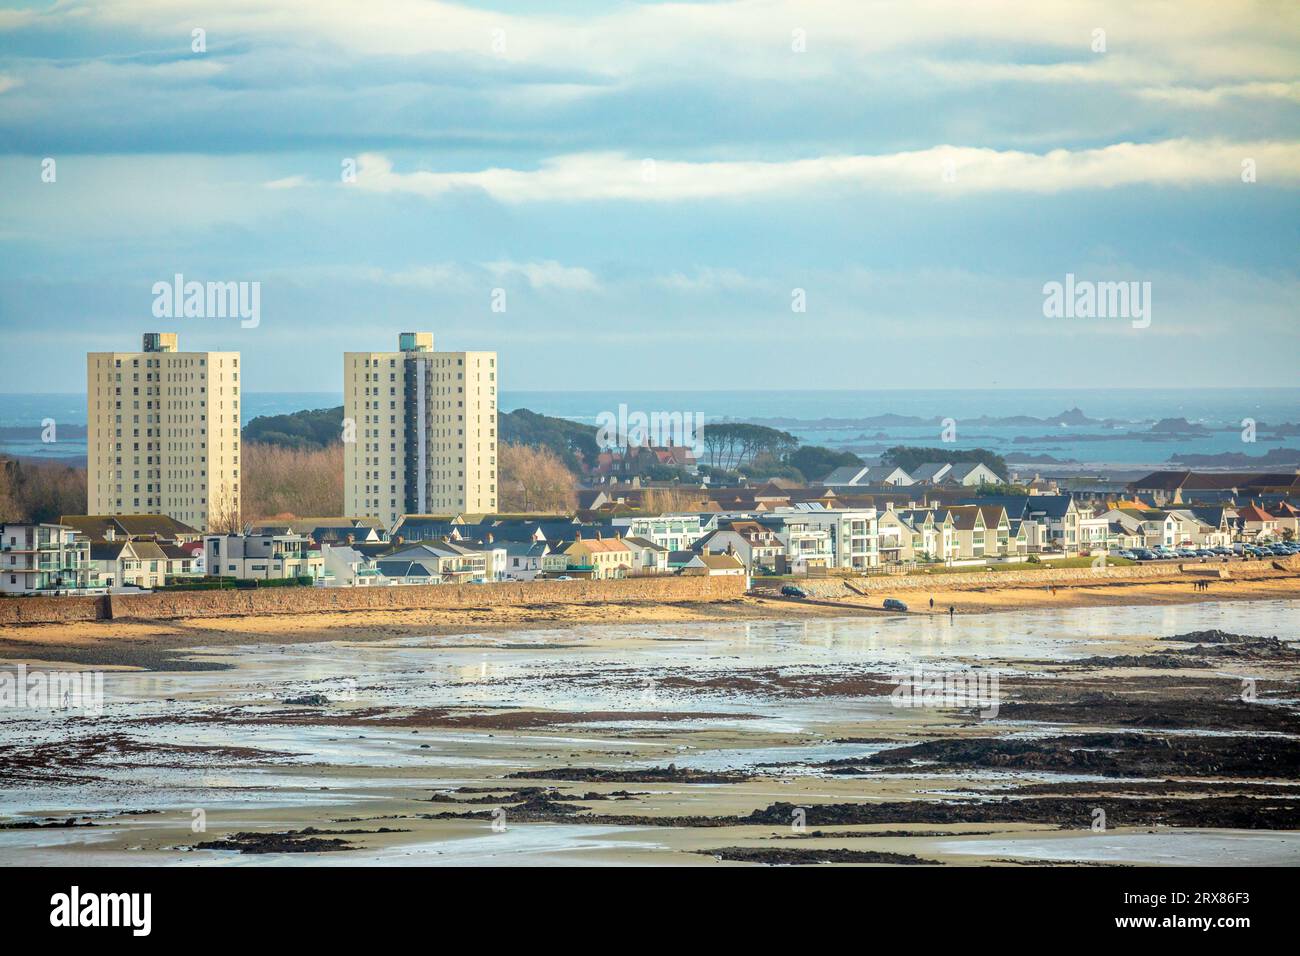 Saint Helier capital city panorama with buildings and residential houses on the La Manche seashore, in low tide bailiwick of Jersey, Channel Islands, Stock Photo